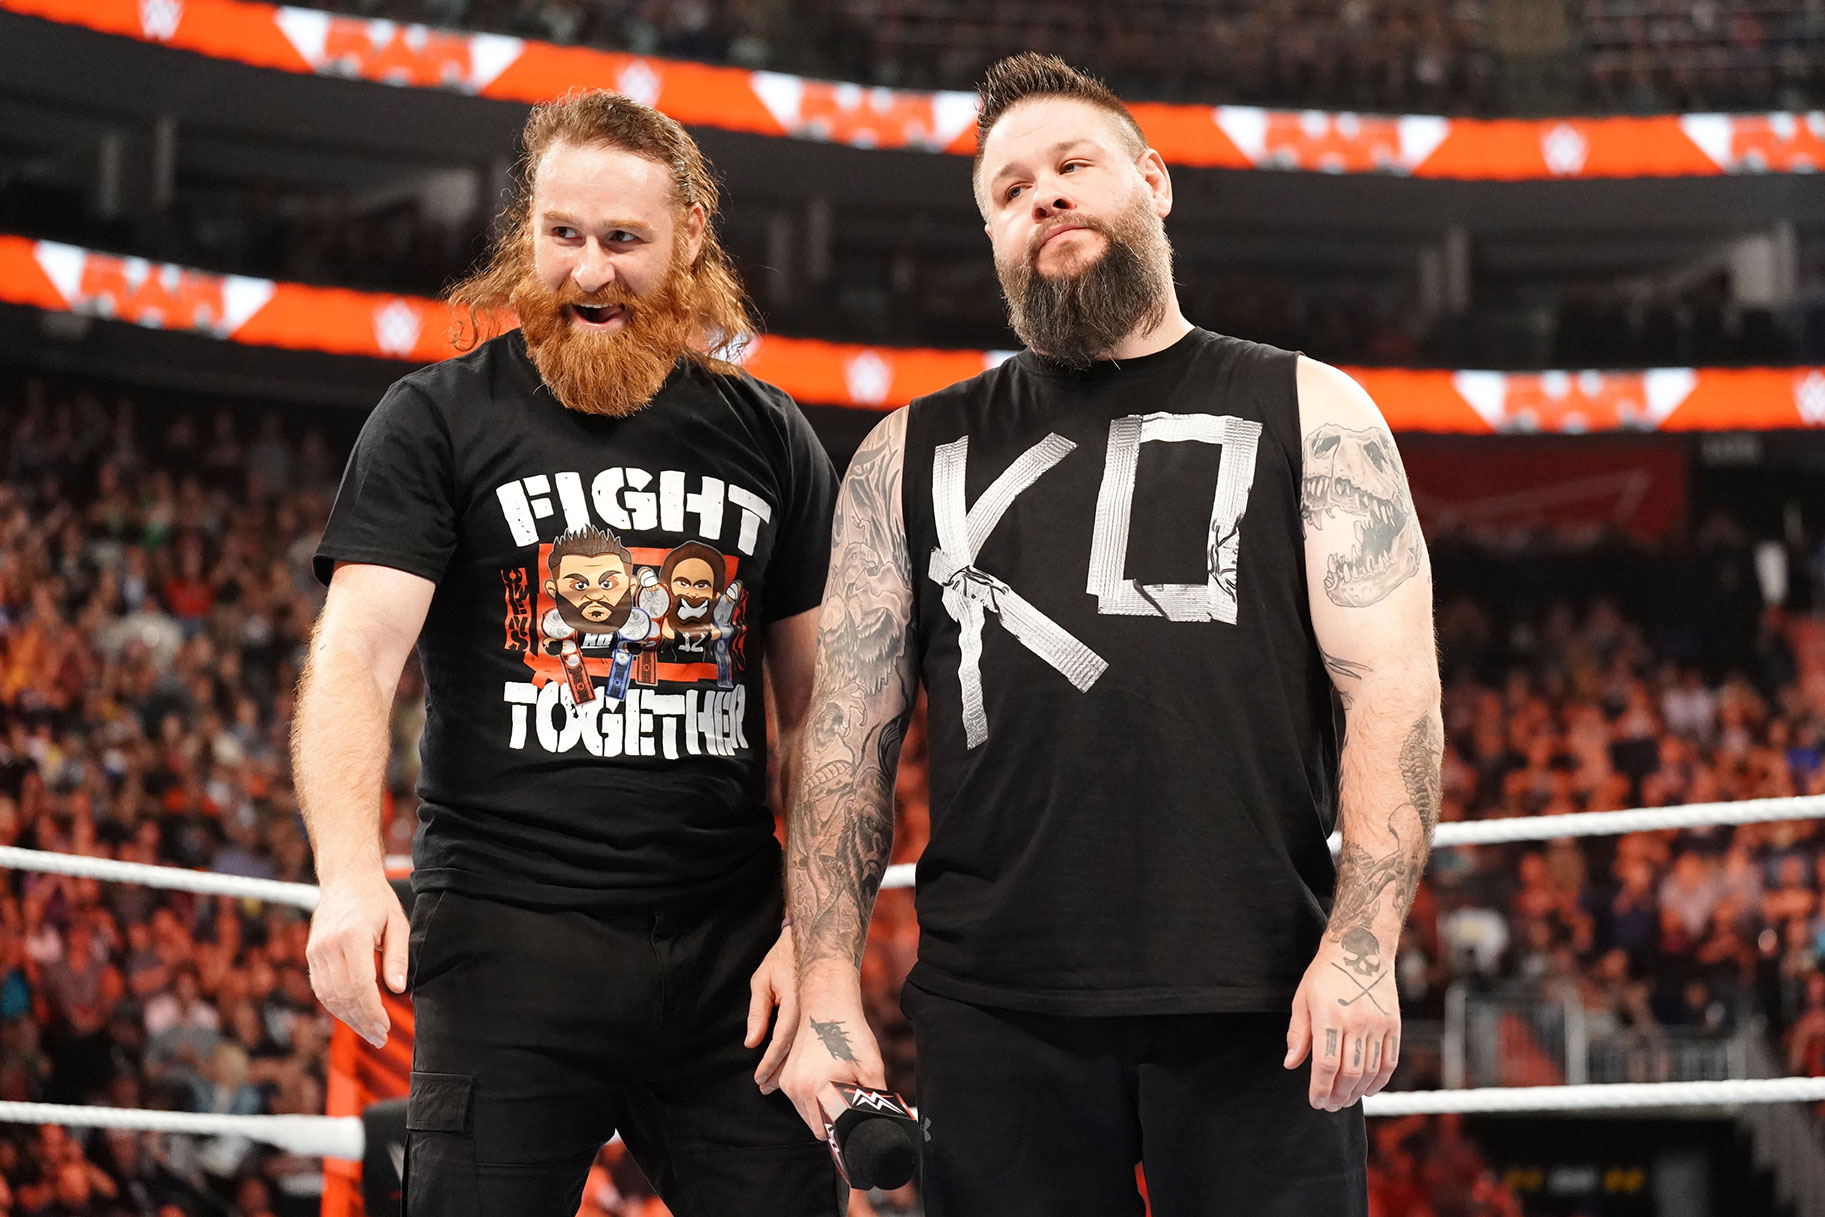 Kevin Owens and Sami Zayn stand in the ring together